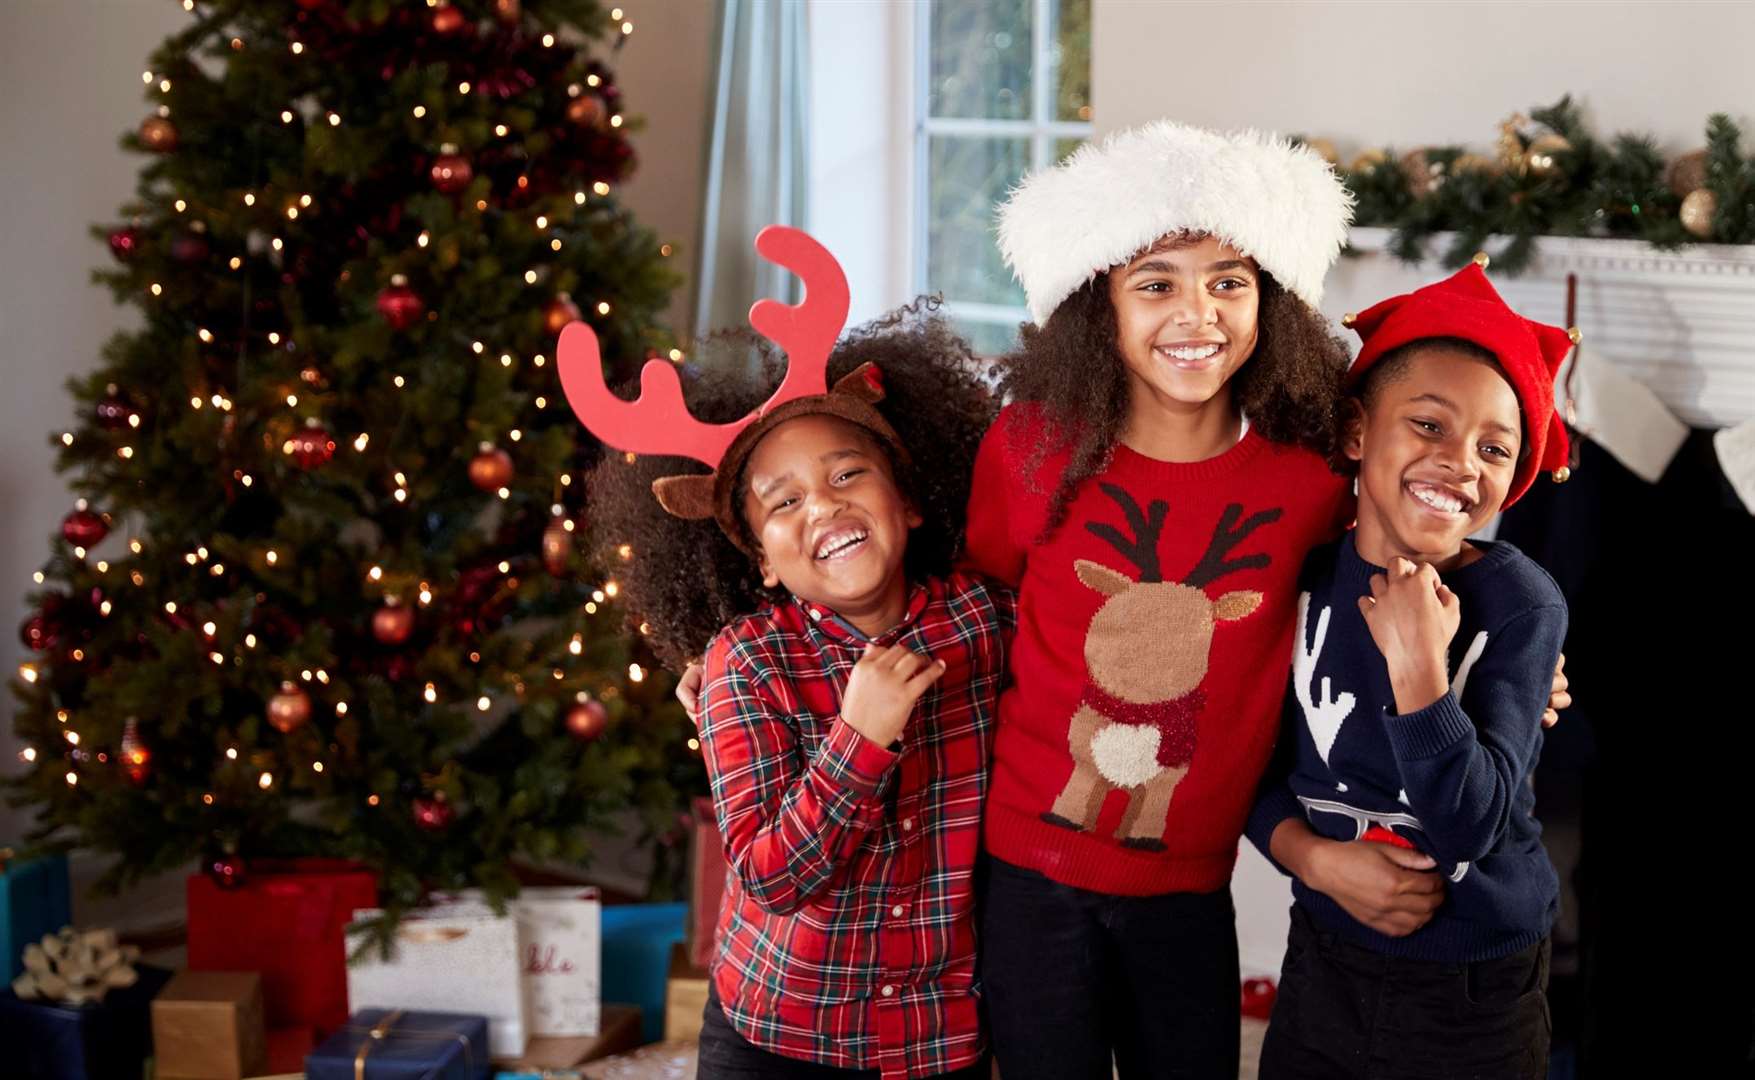 Grab your favourite festive jumper and get ready to take part in this year’s Christmas Jumper Day. Picture: iStock